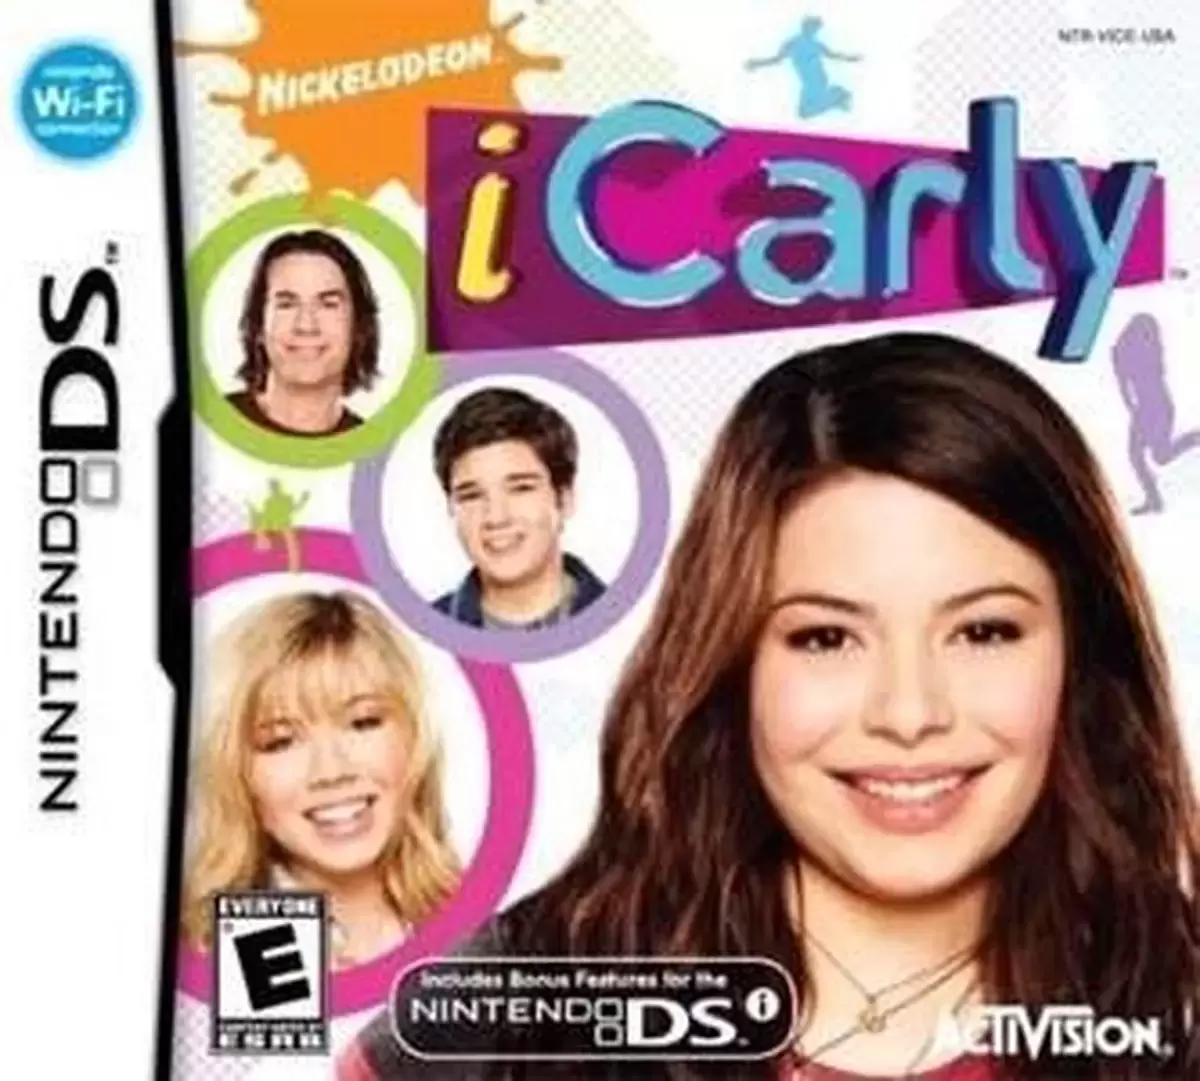 Nintendo DS Games - iCarly